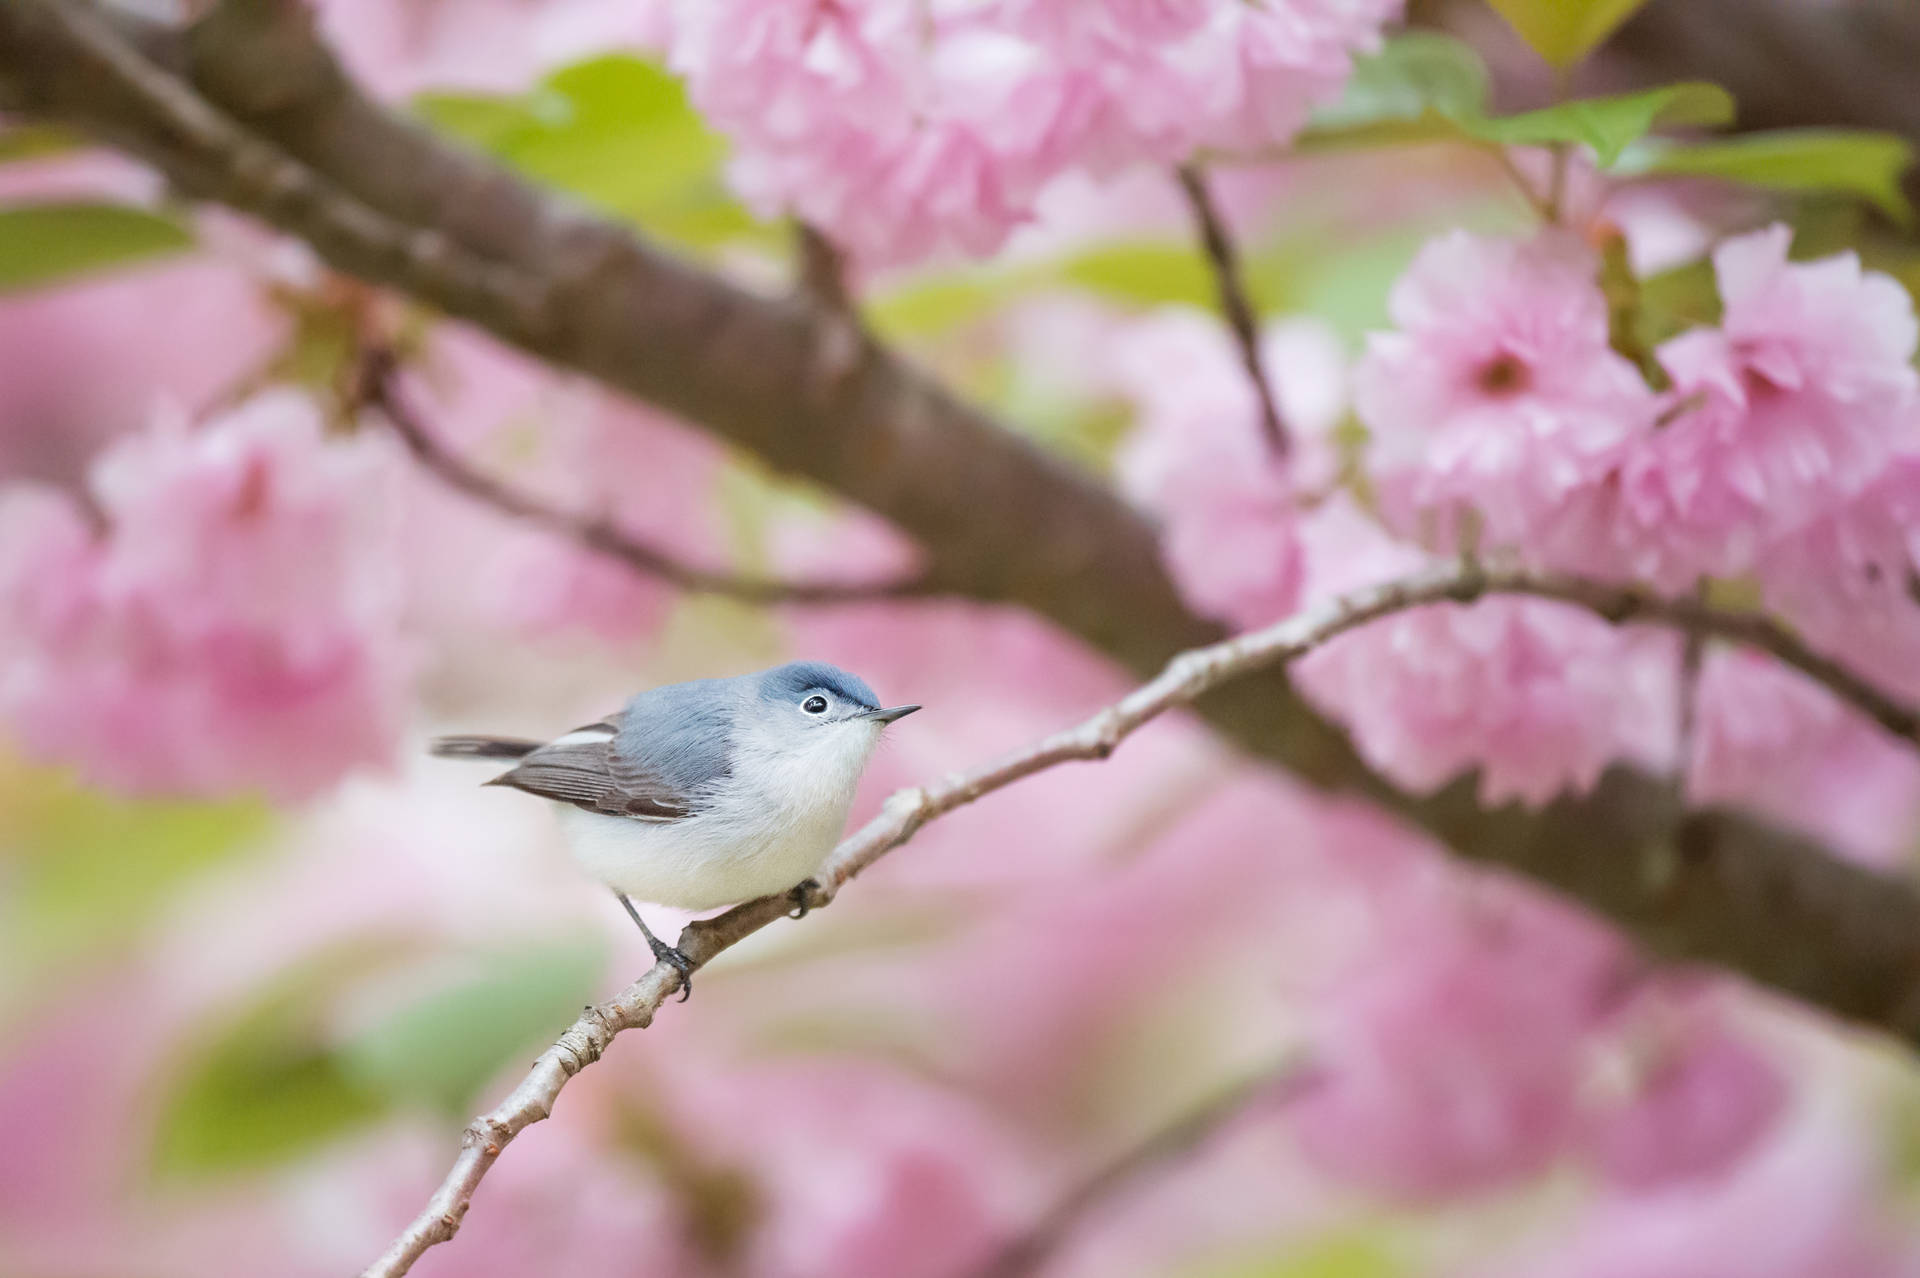 A bird taking a peaceful nap in a bed of pink blossoms Wallpaper